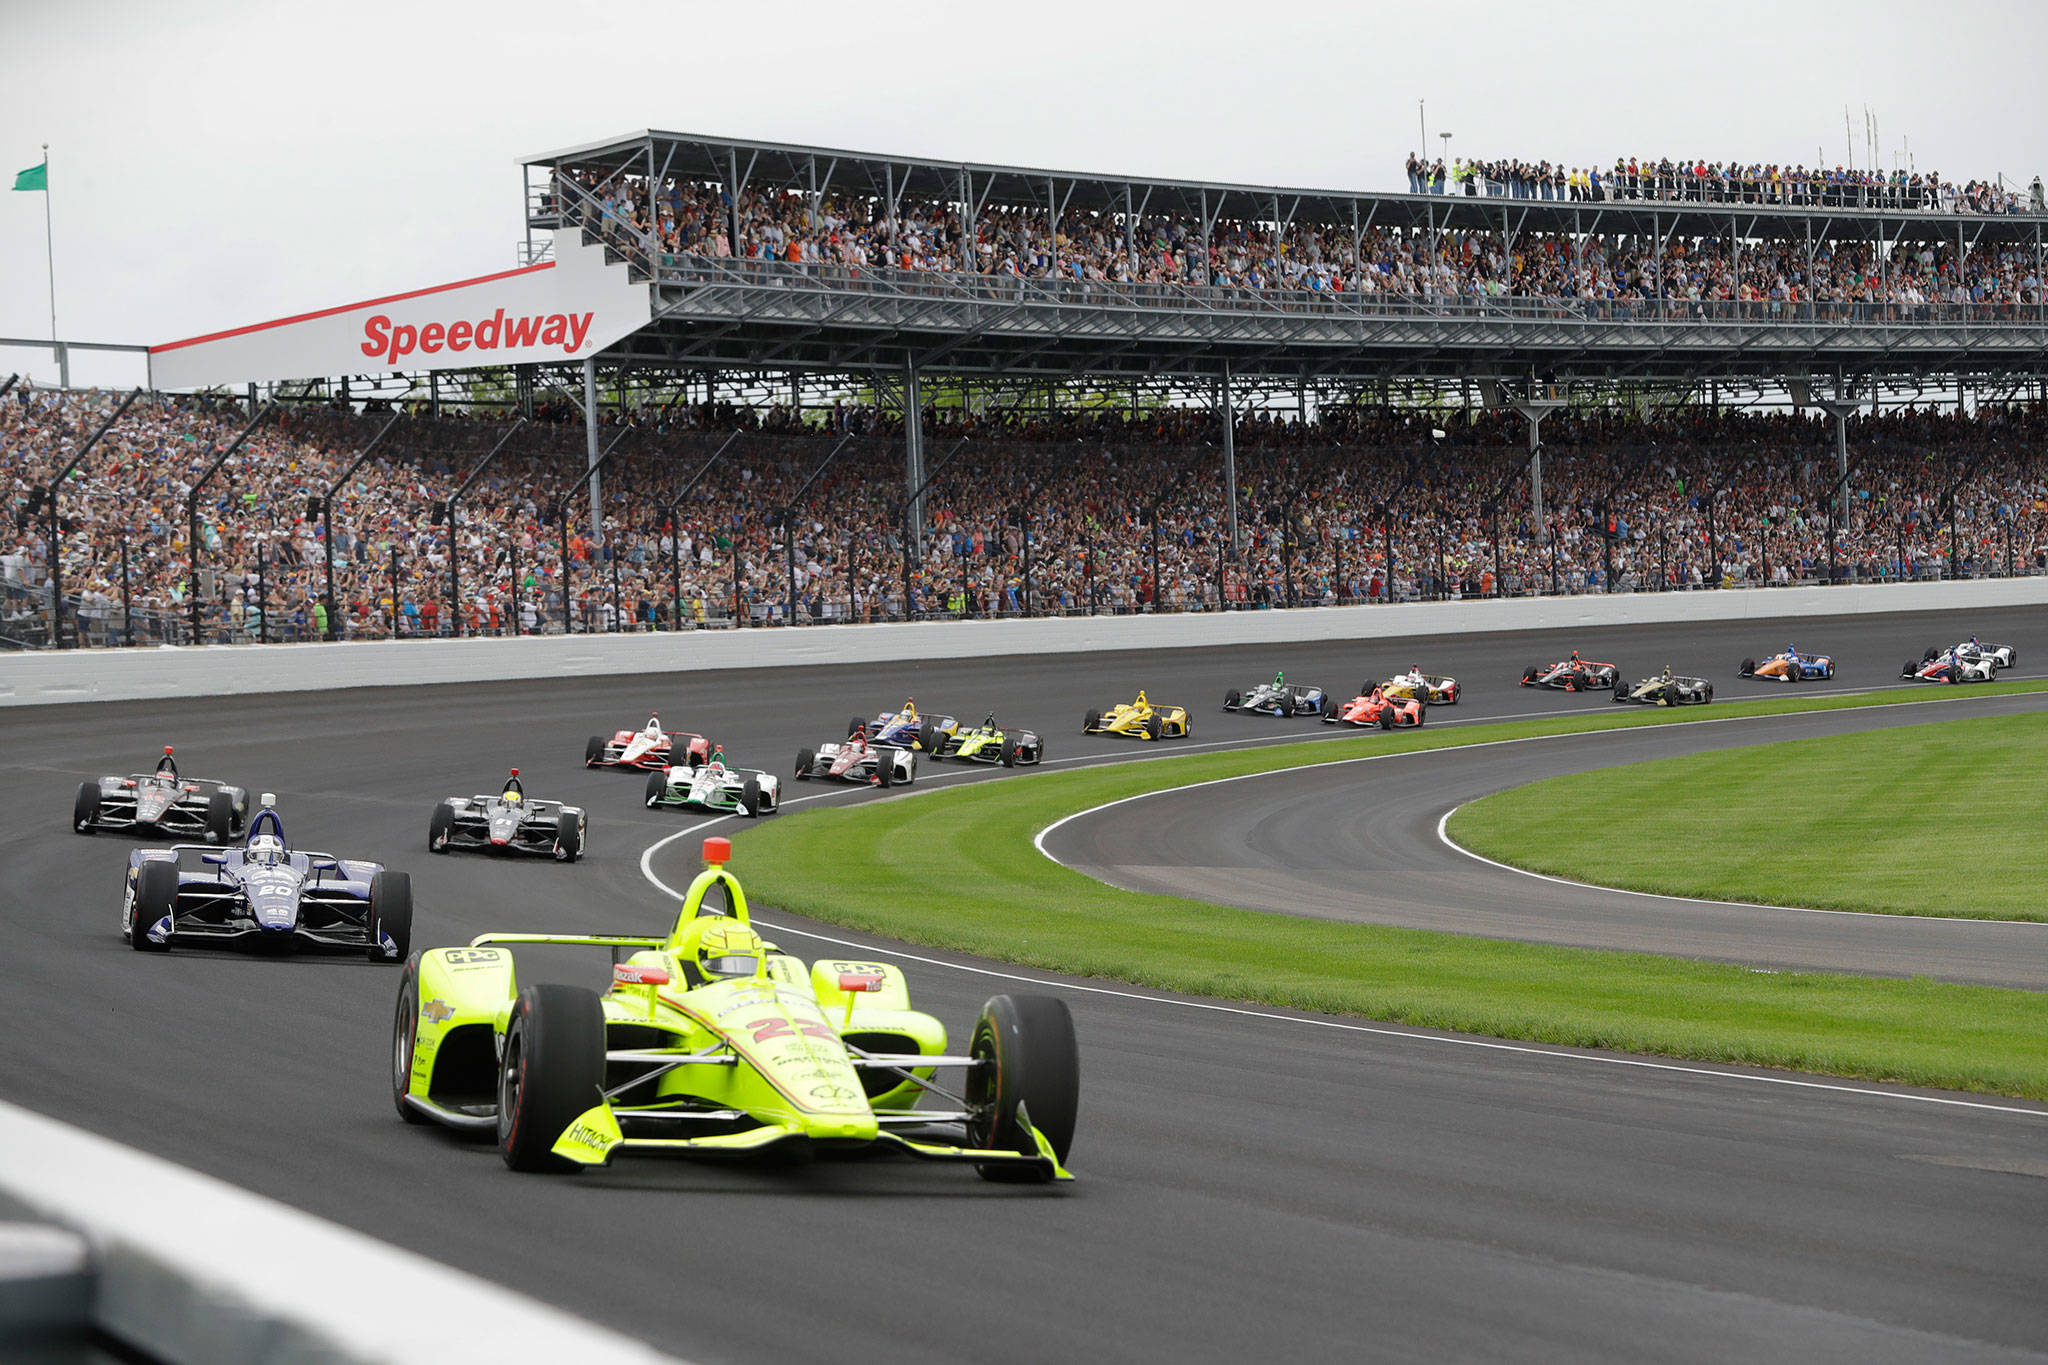 The Indianapolis 500 scheduled for May 24 has been postponed until August because of the coronavirus pandemic and won’t run on Memorial Day weekend for the first time since 1946. The race will instead be held Aug. 23. (AP Photo/Darron Cummings)